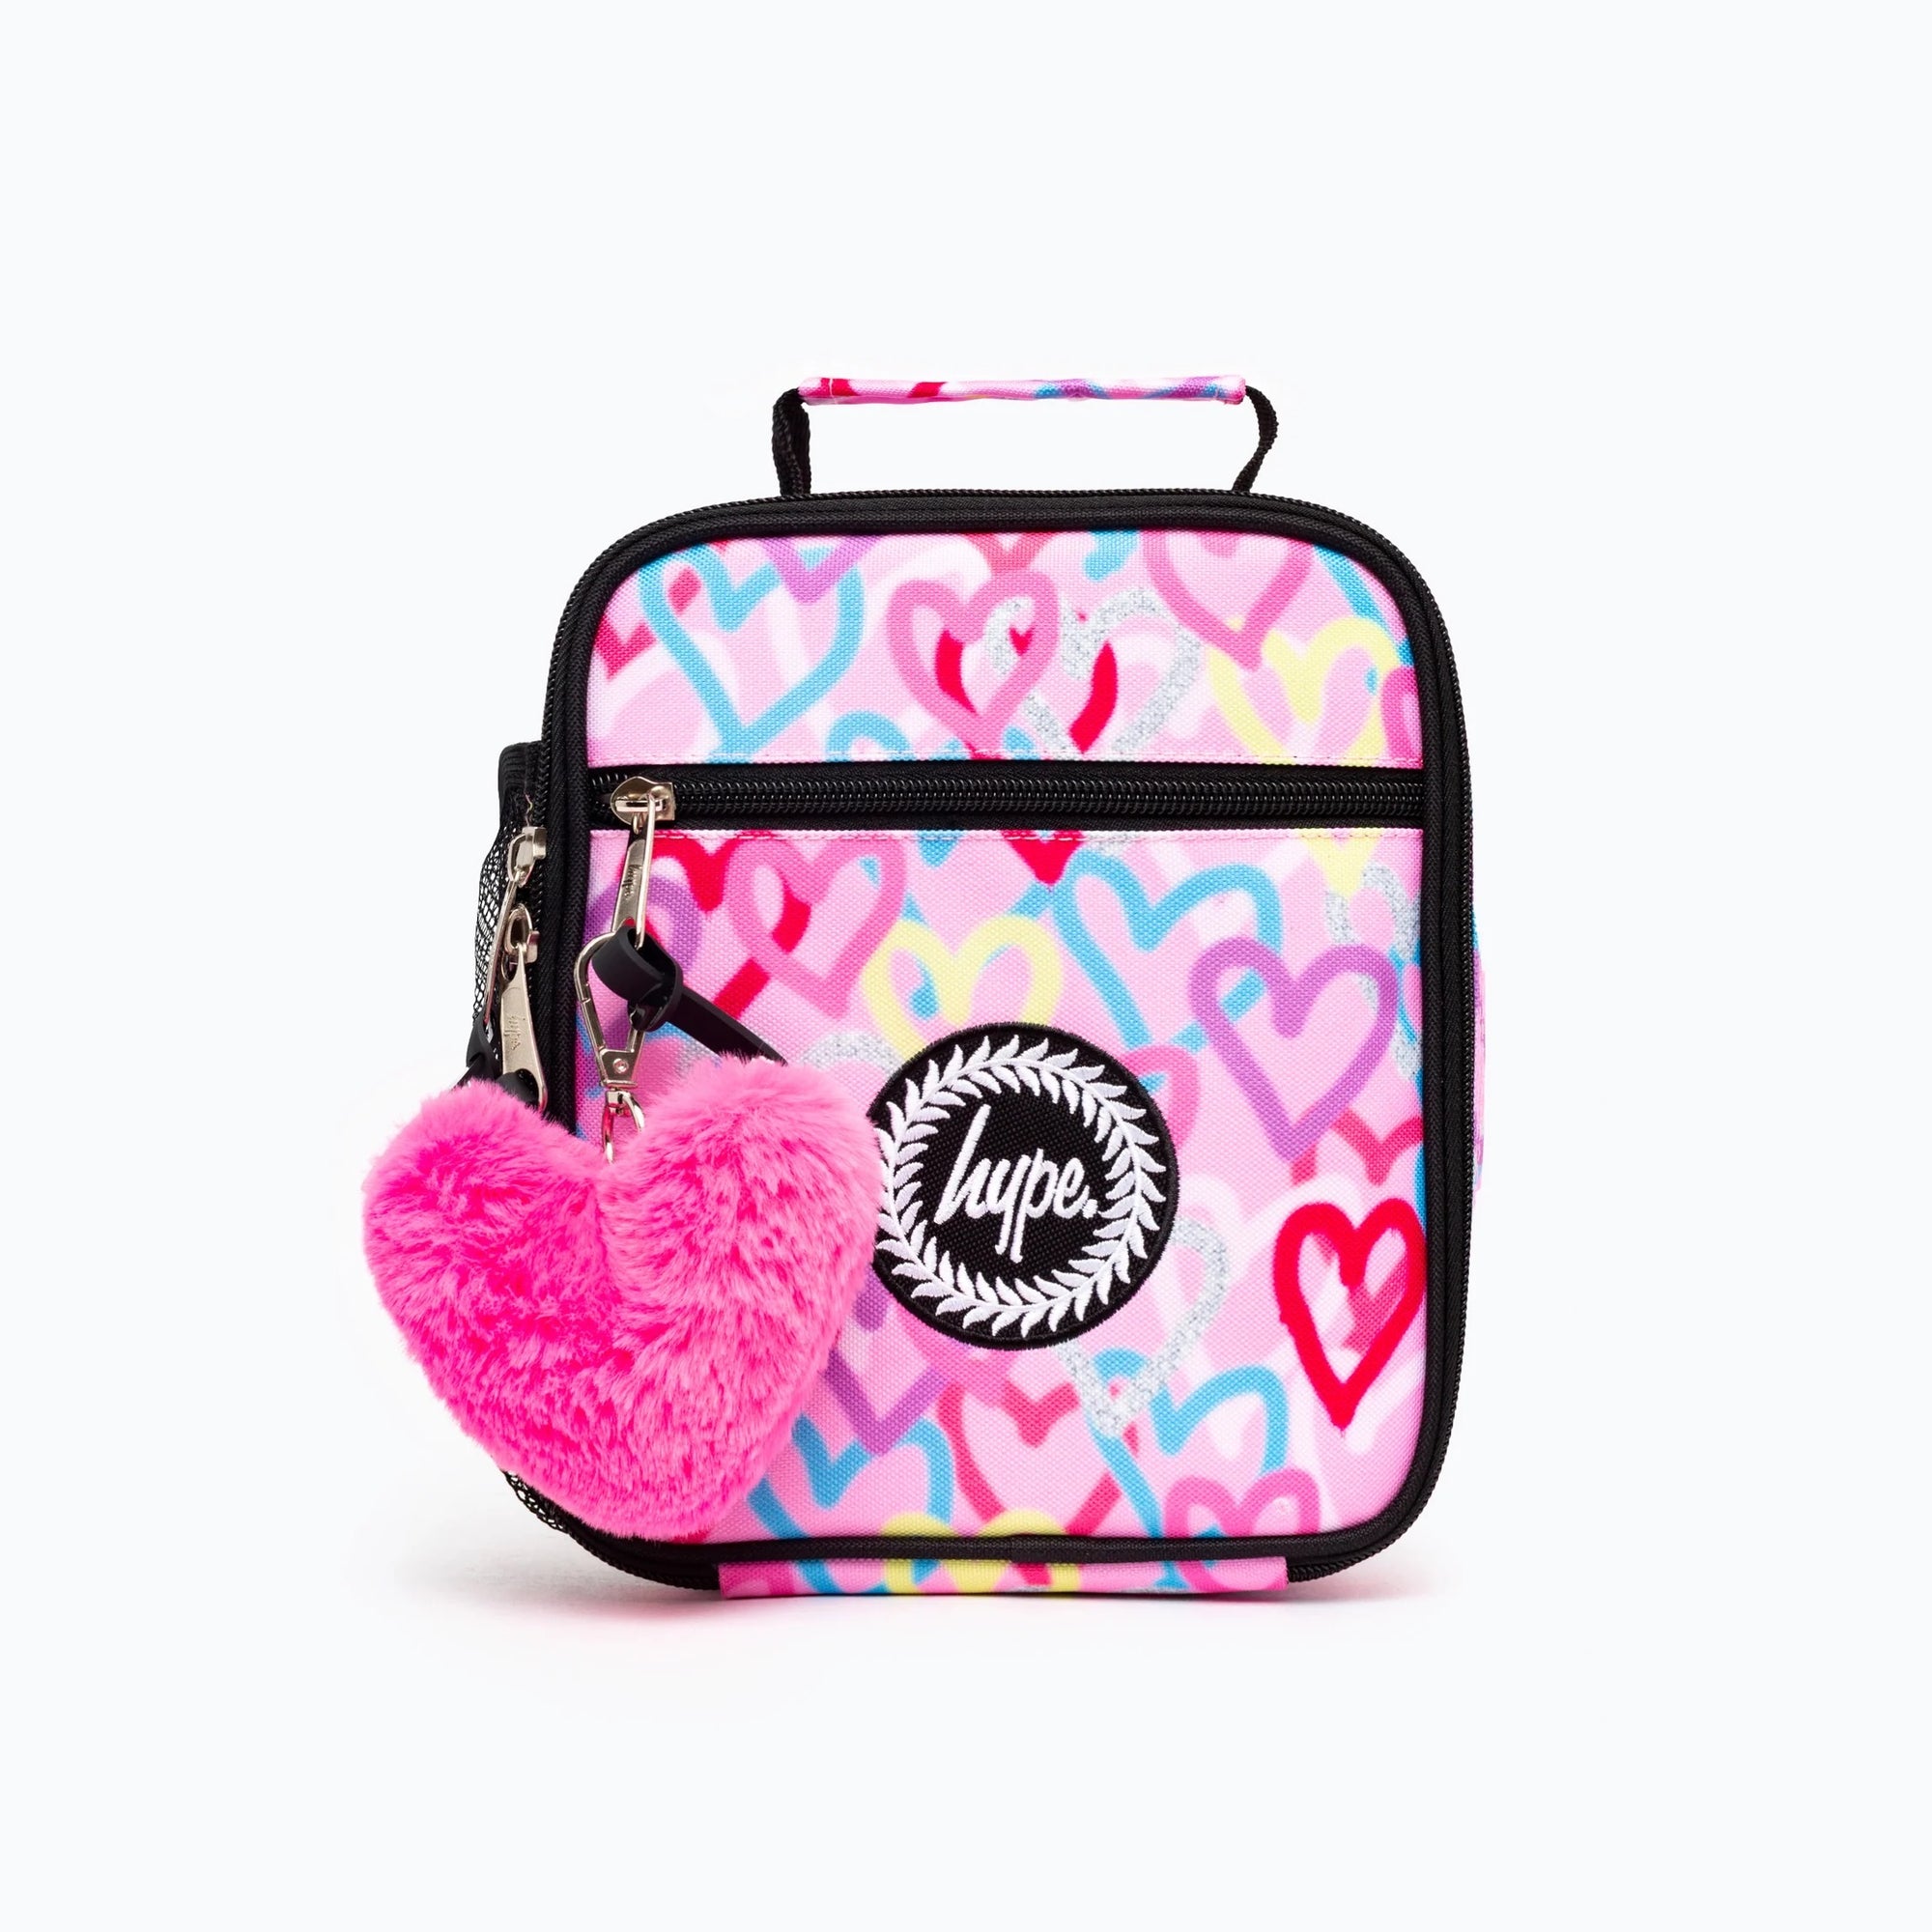 Hype Pink Graffiti Hearts Lunchbag Xucb159 Accessories ONE SIZE / Pink